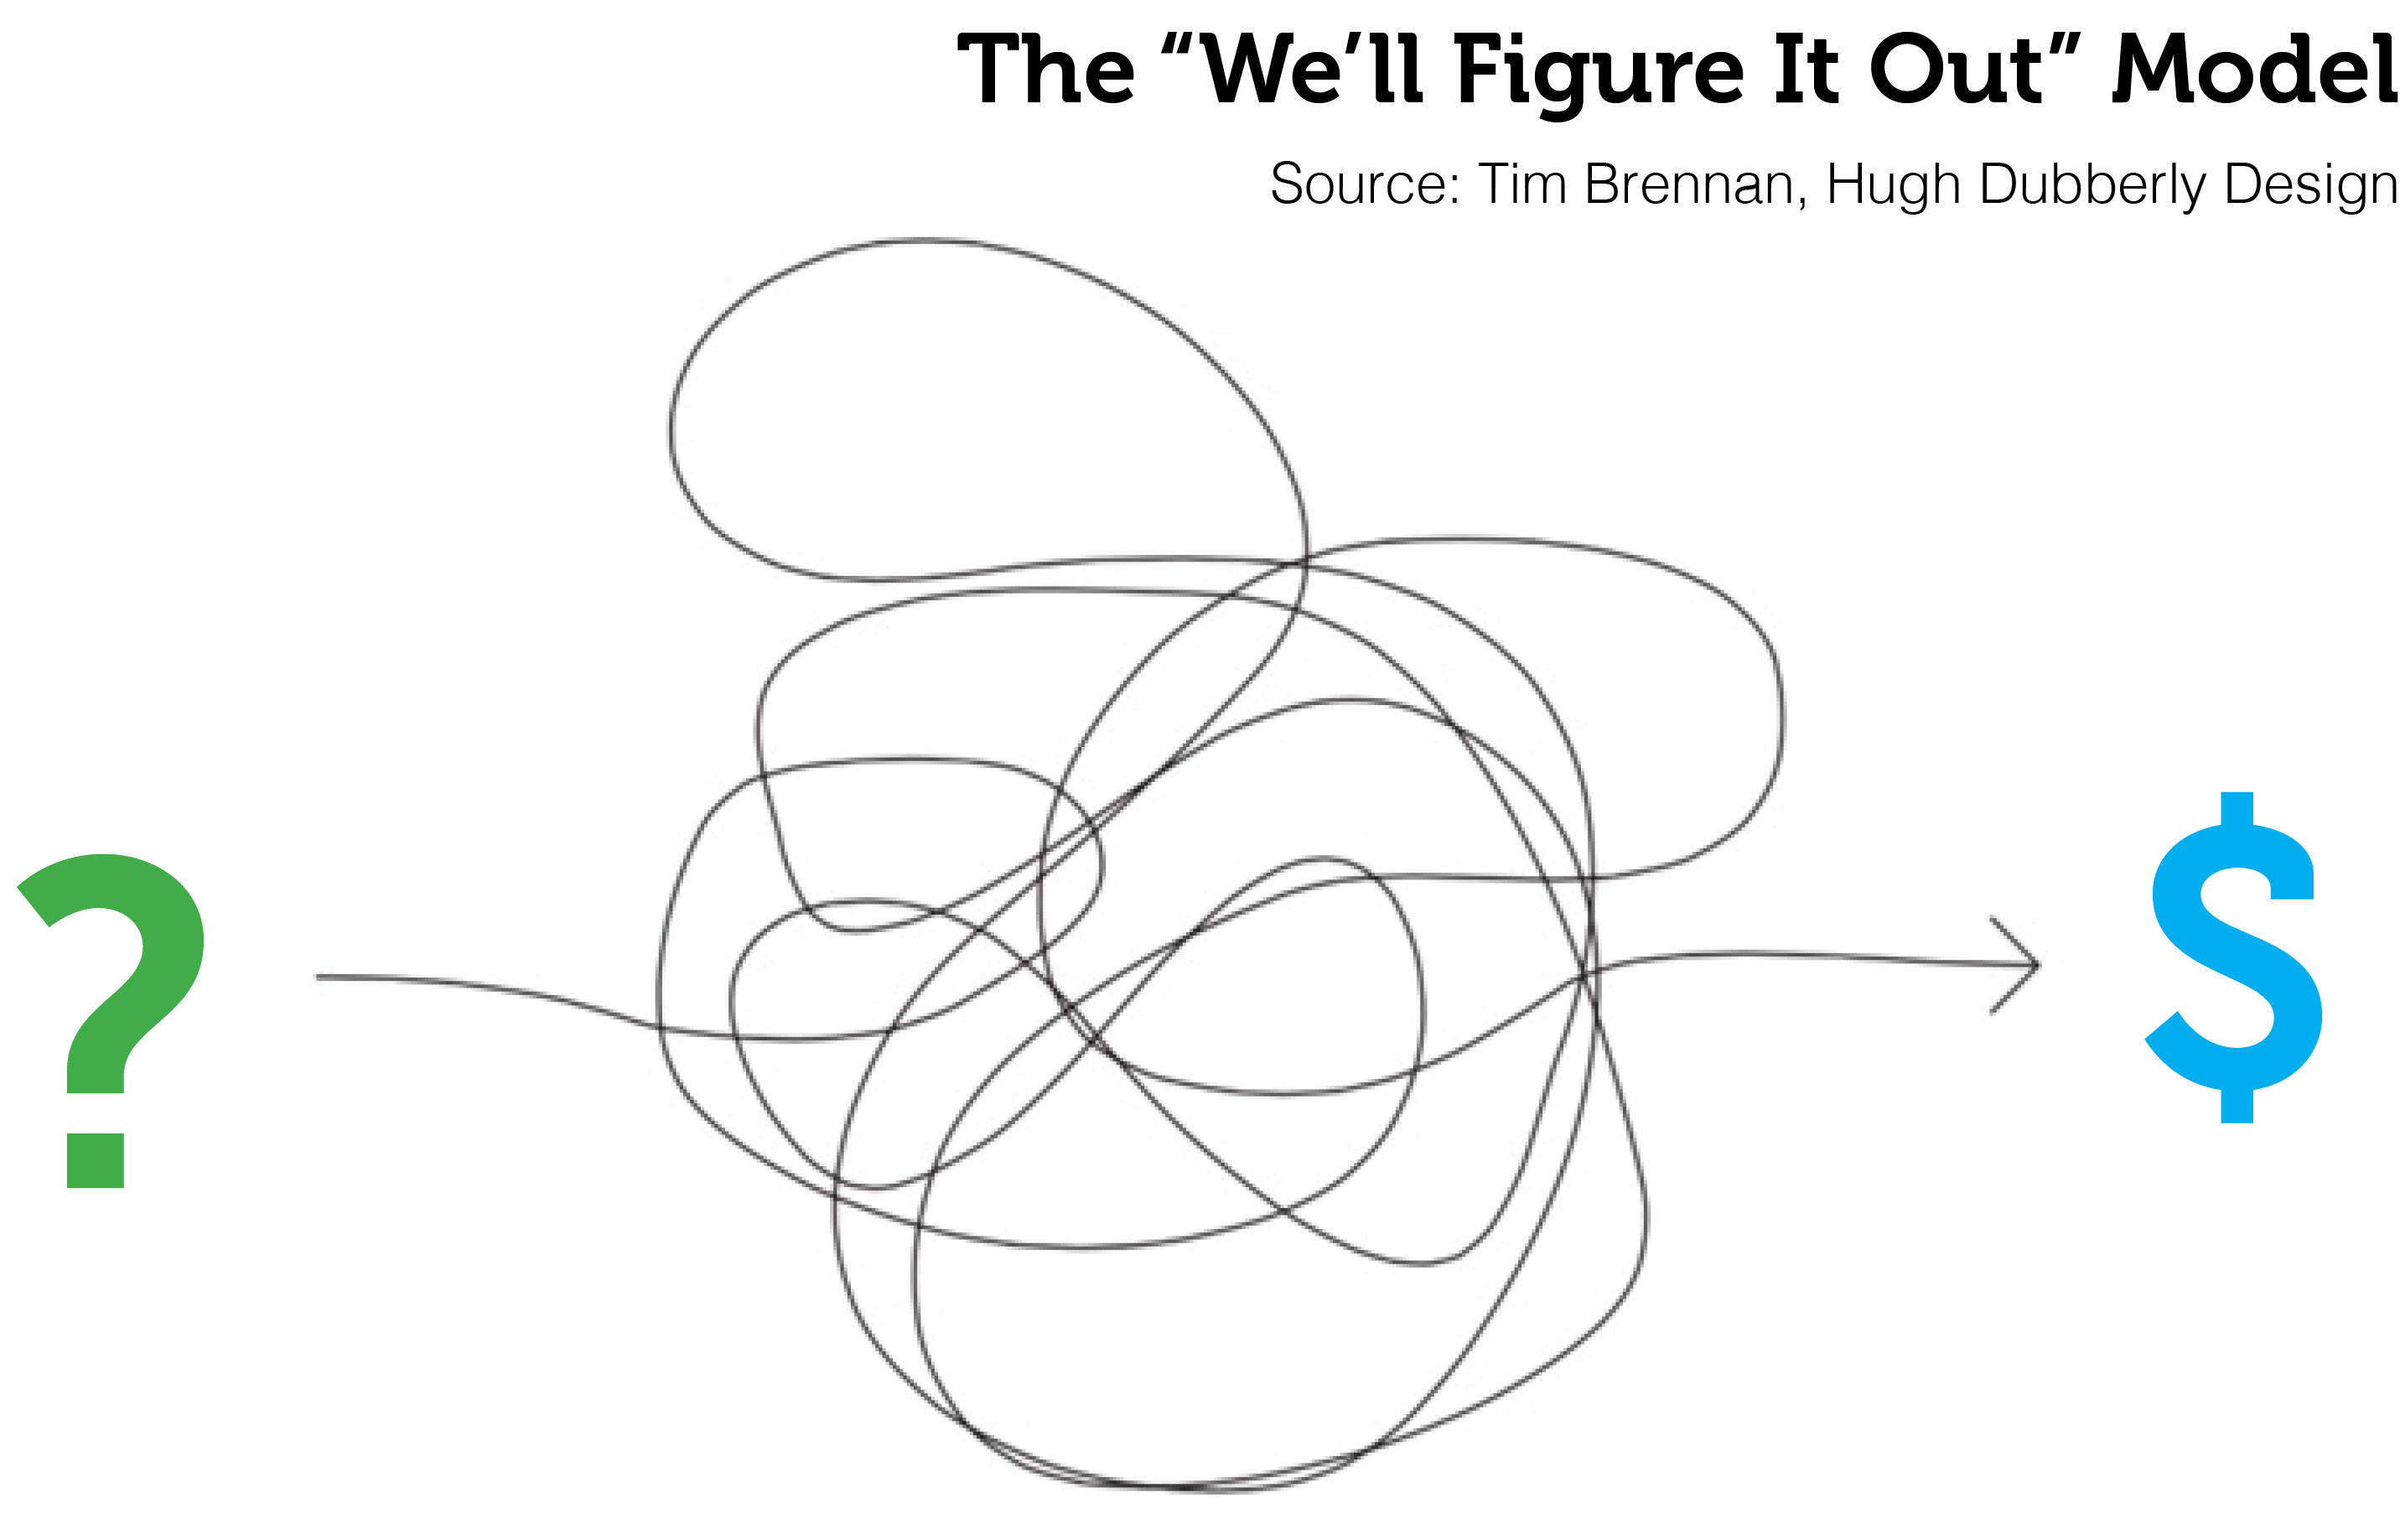 The "We'll Figure It Out" Model